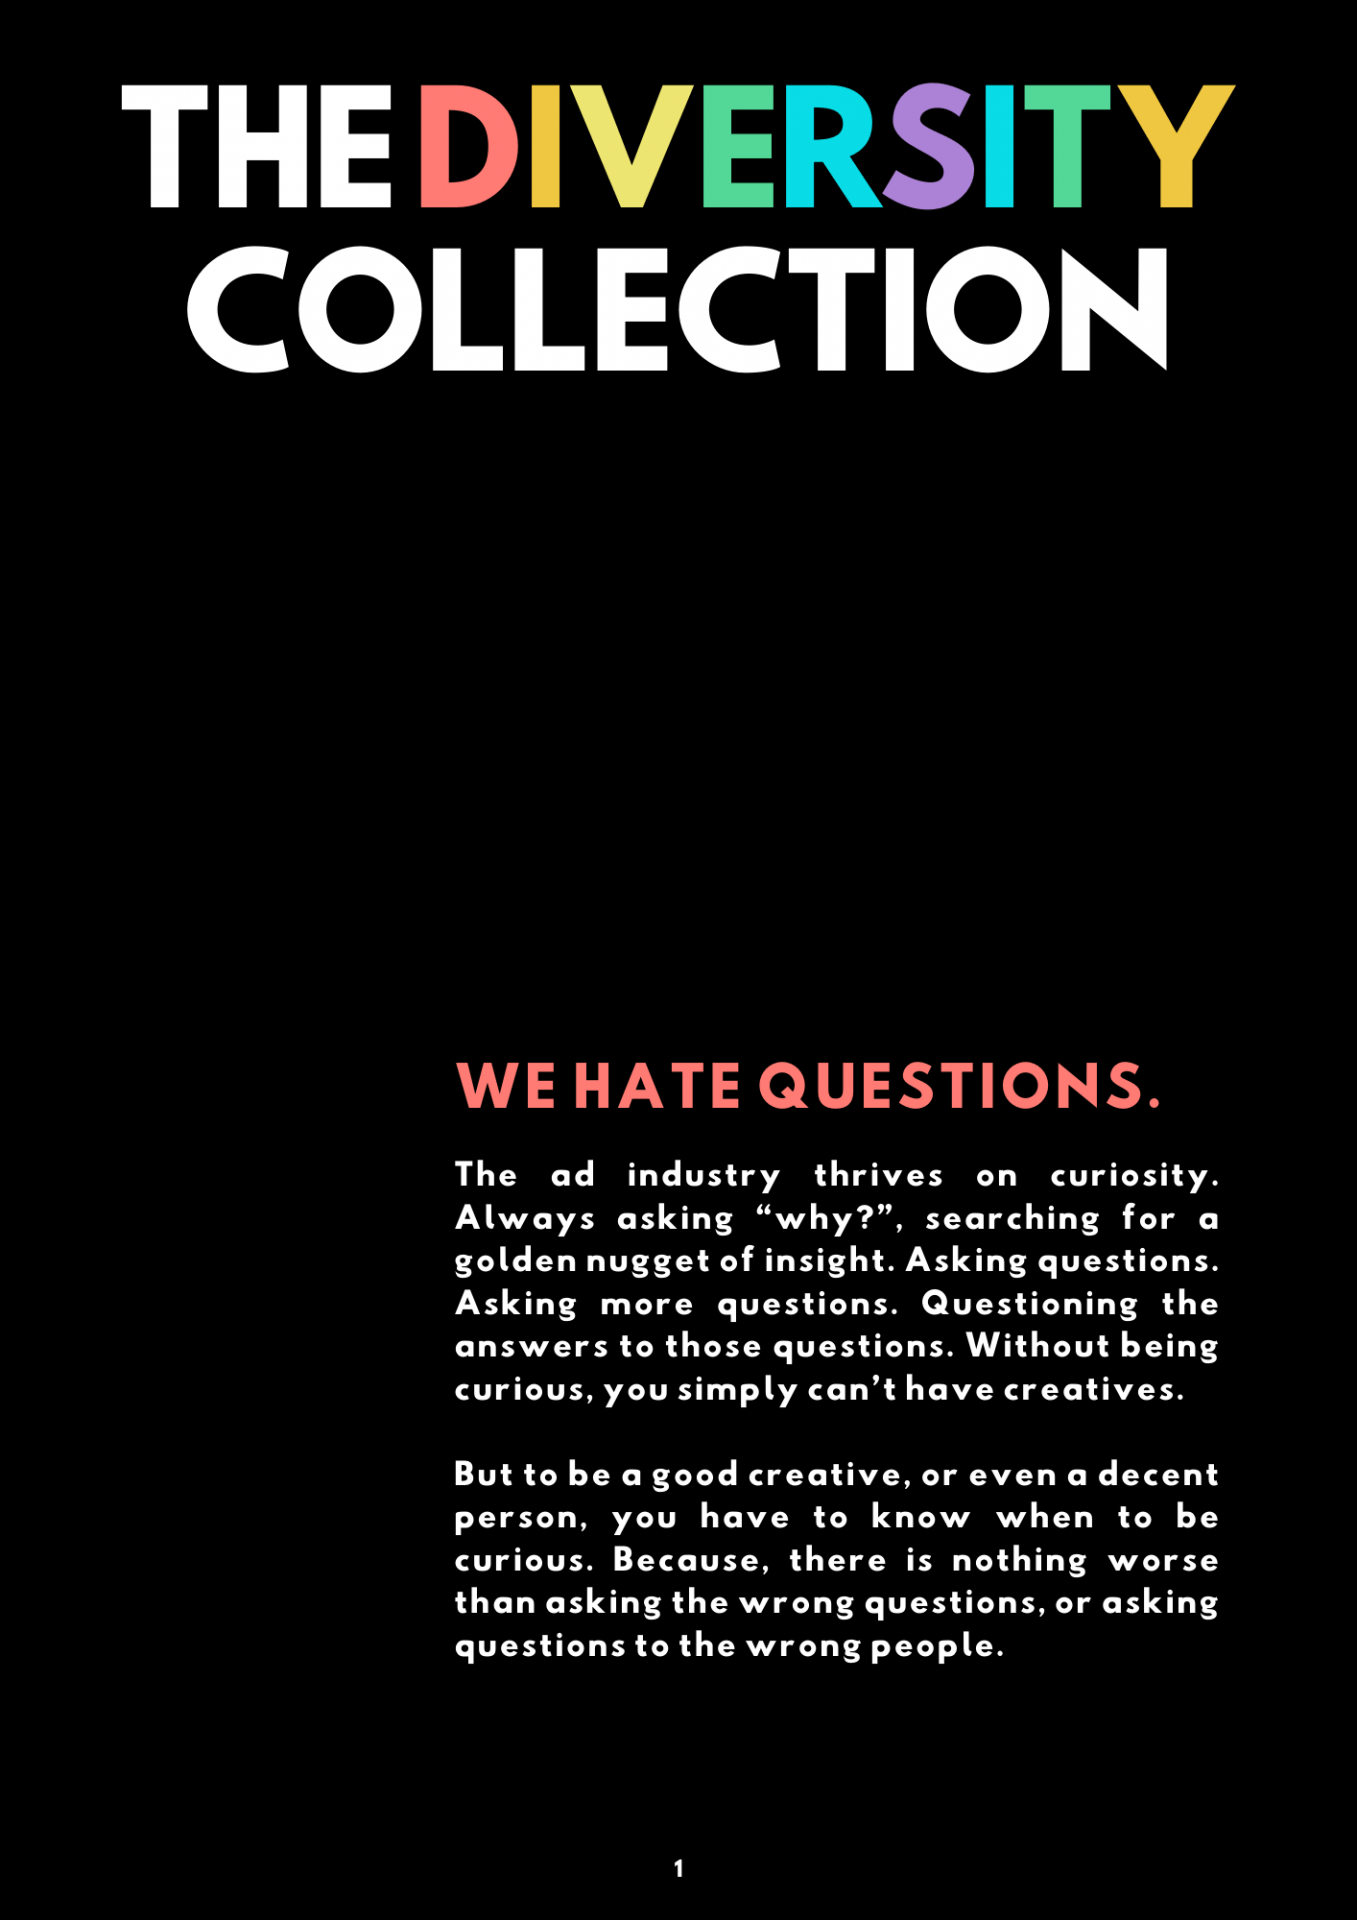 Image of page one of The Diversity Collection’s Introduction.